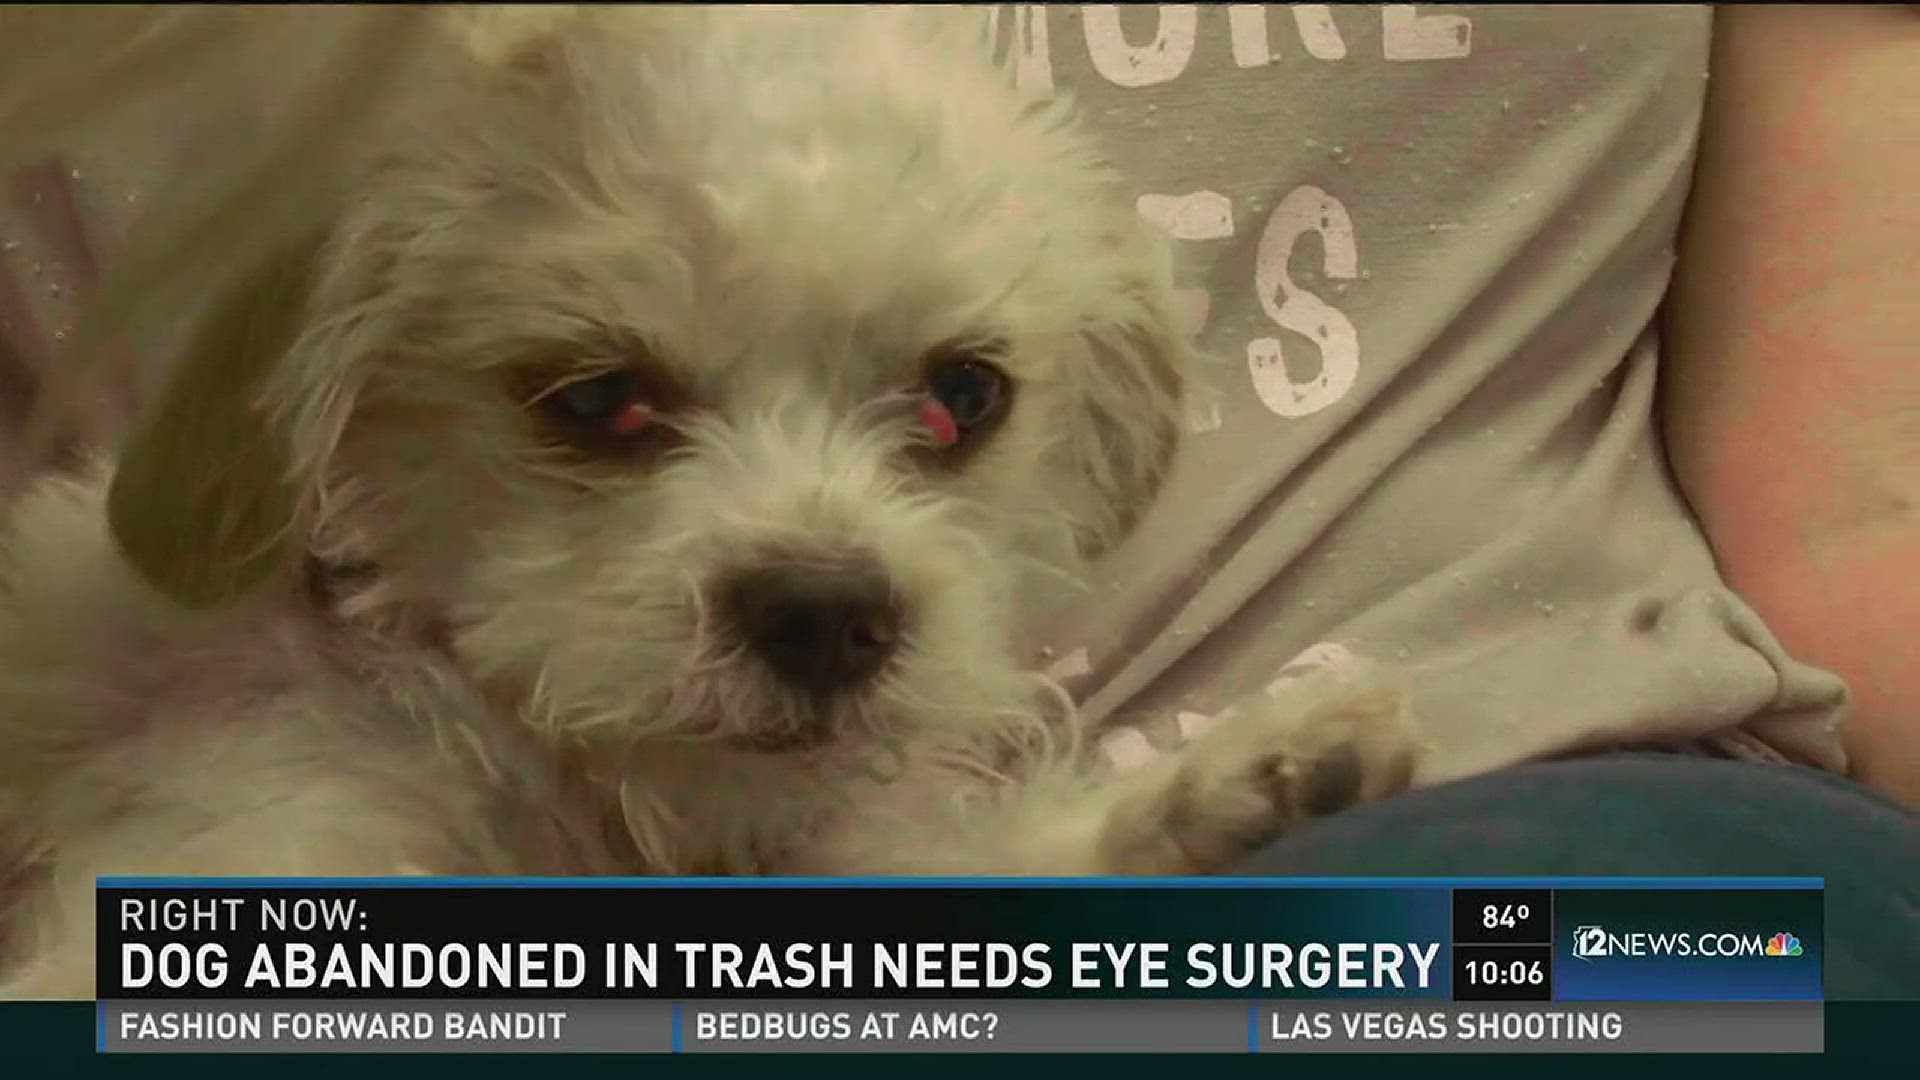 A small dog was was thrown away in a trash bin. He now needs surgery to repair an eye condition known as "cherry eye." Several people have donated to that cause already, but you can help by visiting  http://animalsbenefitclub.com/